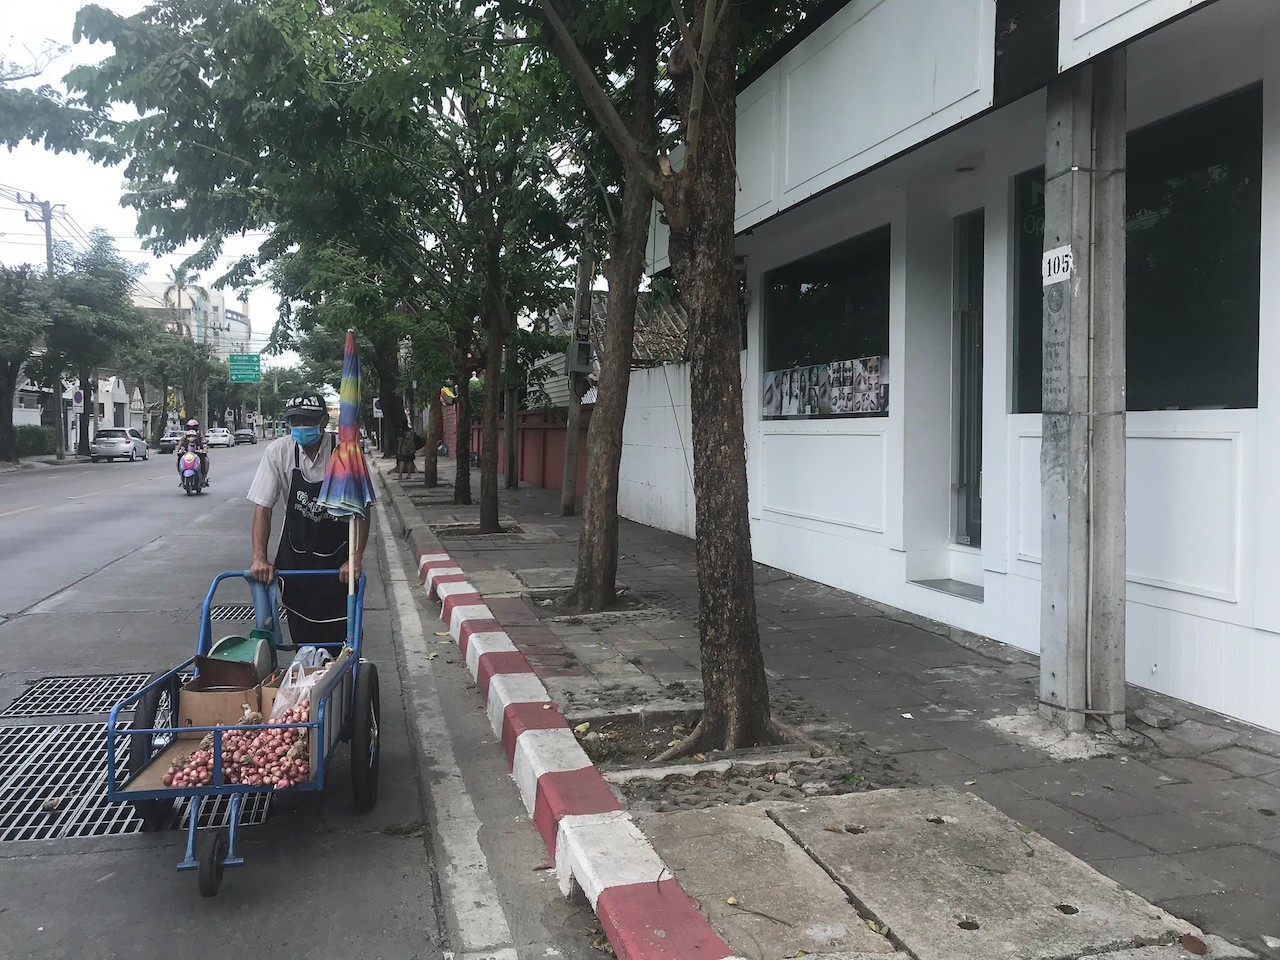 Street vendor with no customers in the empty street in Bangkok during COVID-19 pandemic